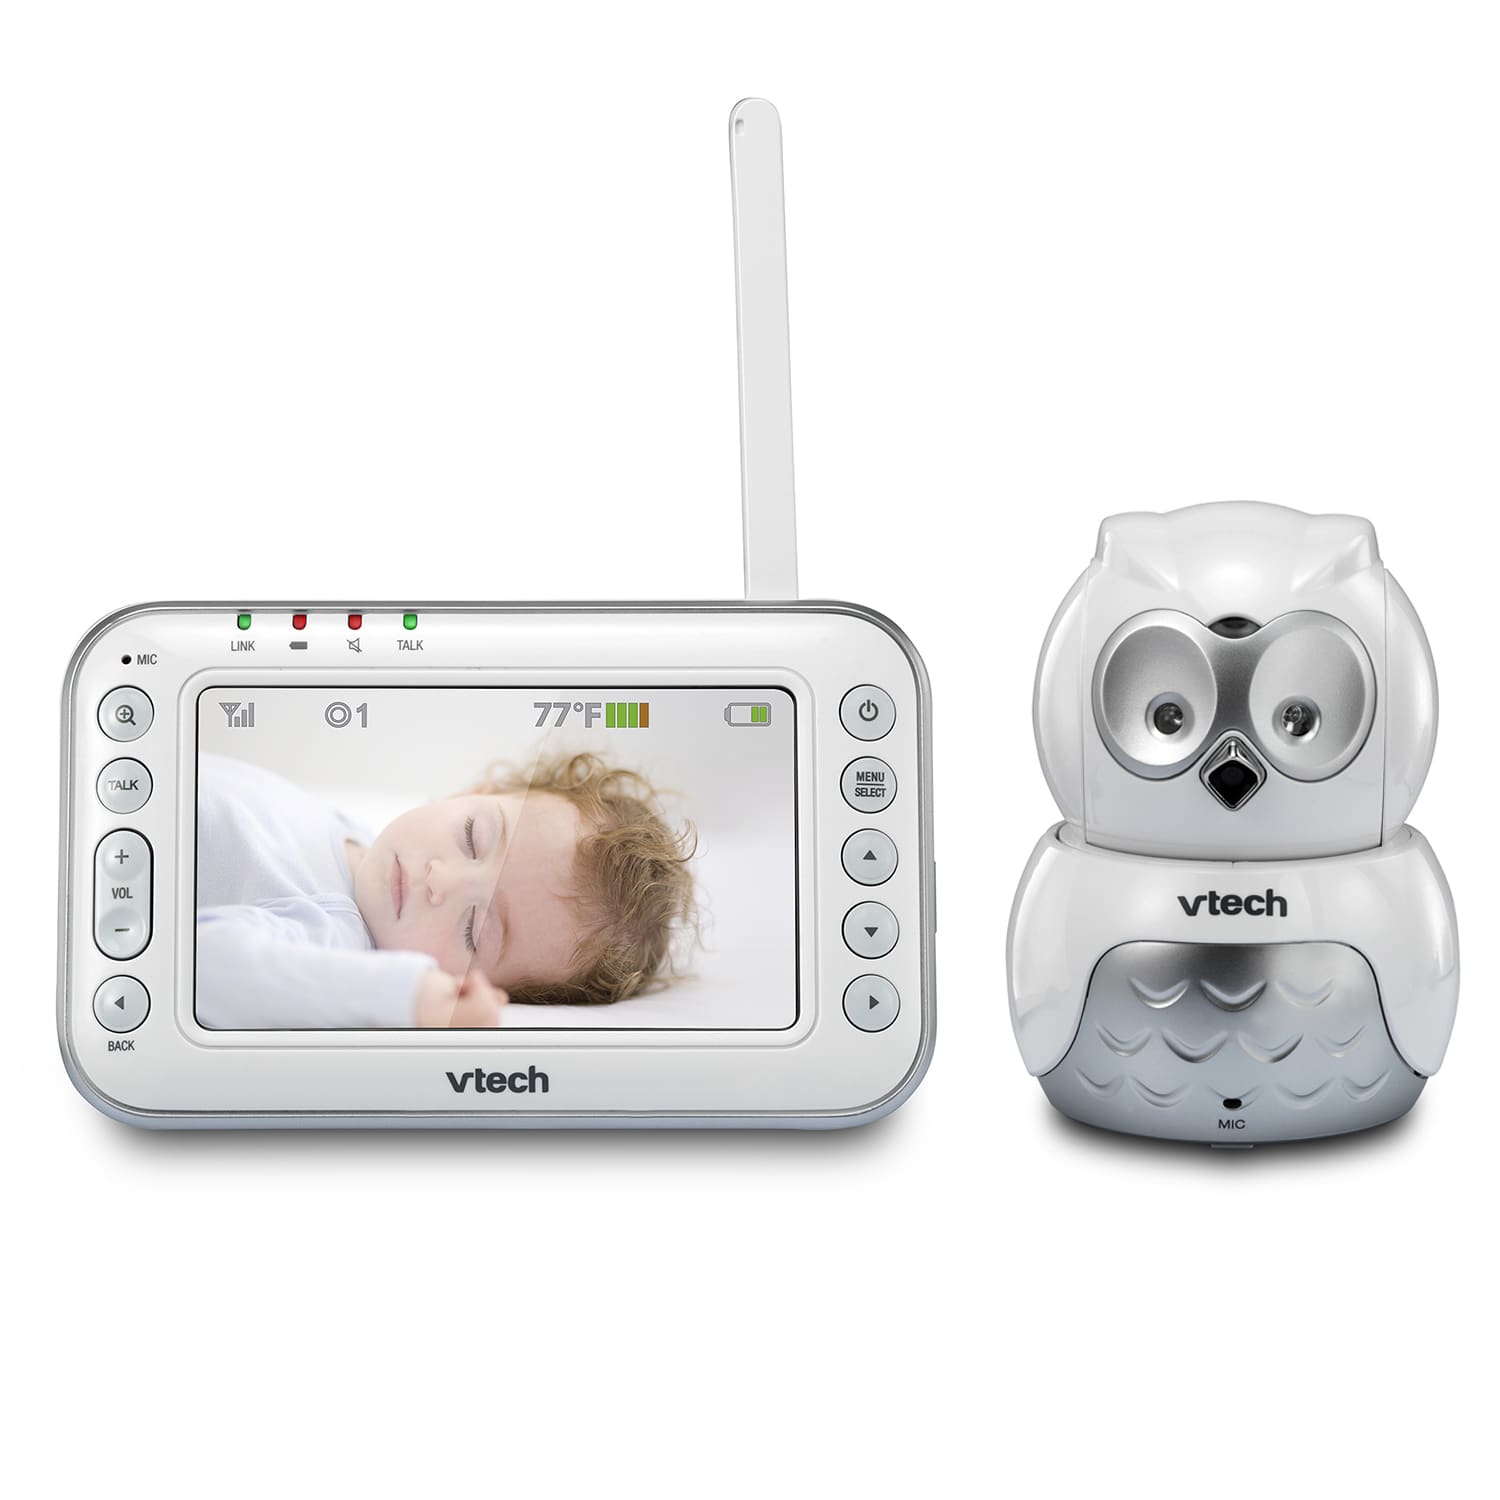 VTech Video Baby Monitor ONLY.